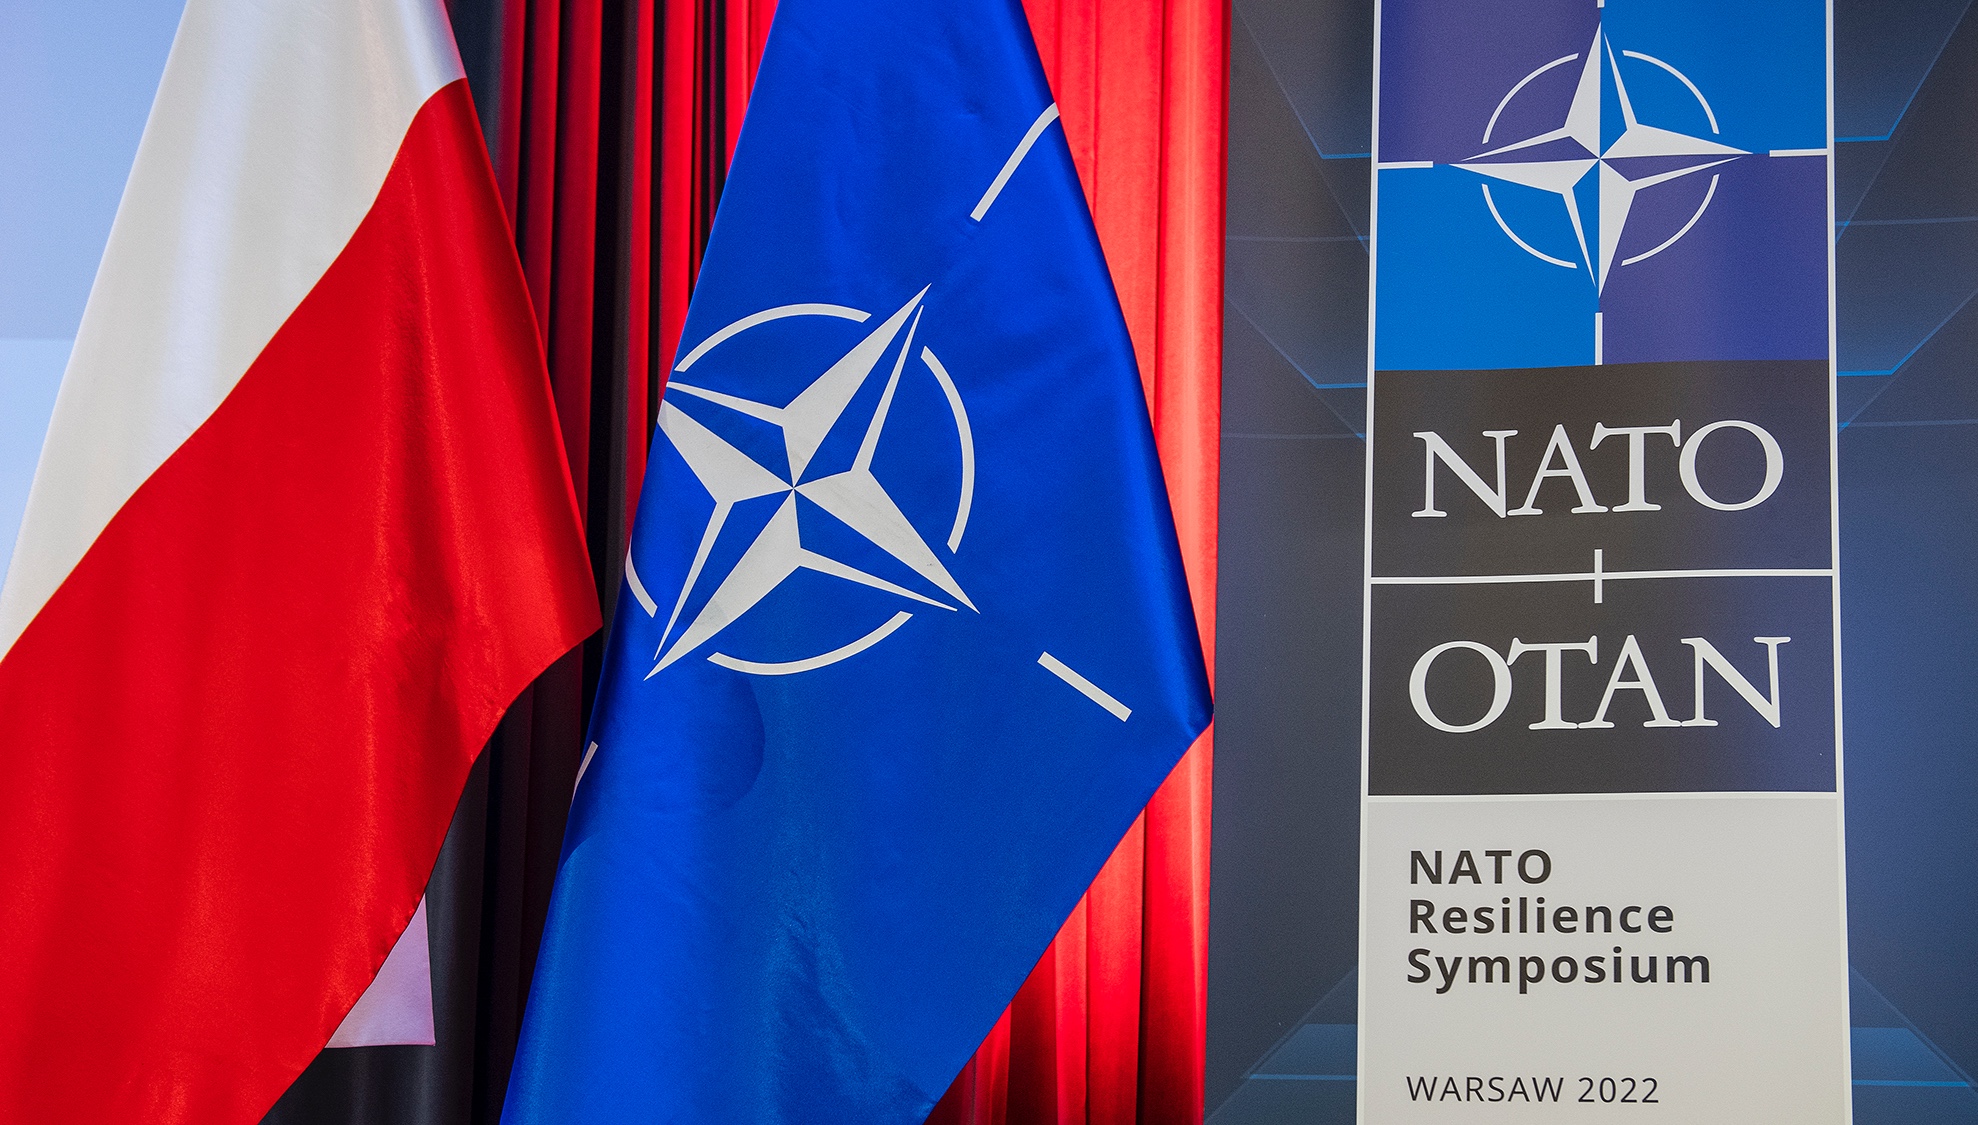 NATO Resilience Symposium in Warsaw. MoD:  